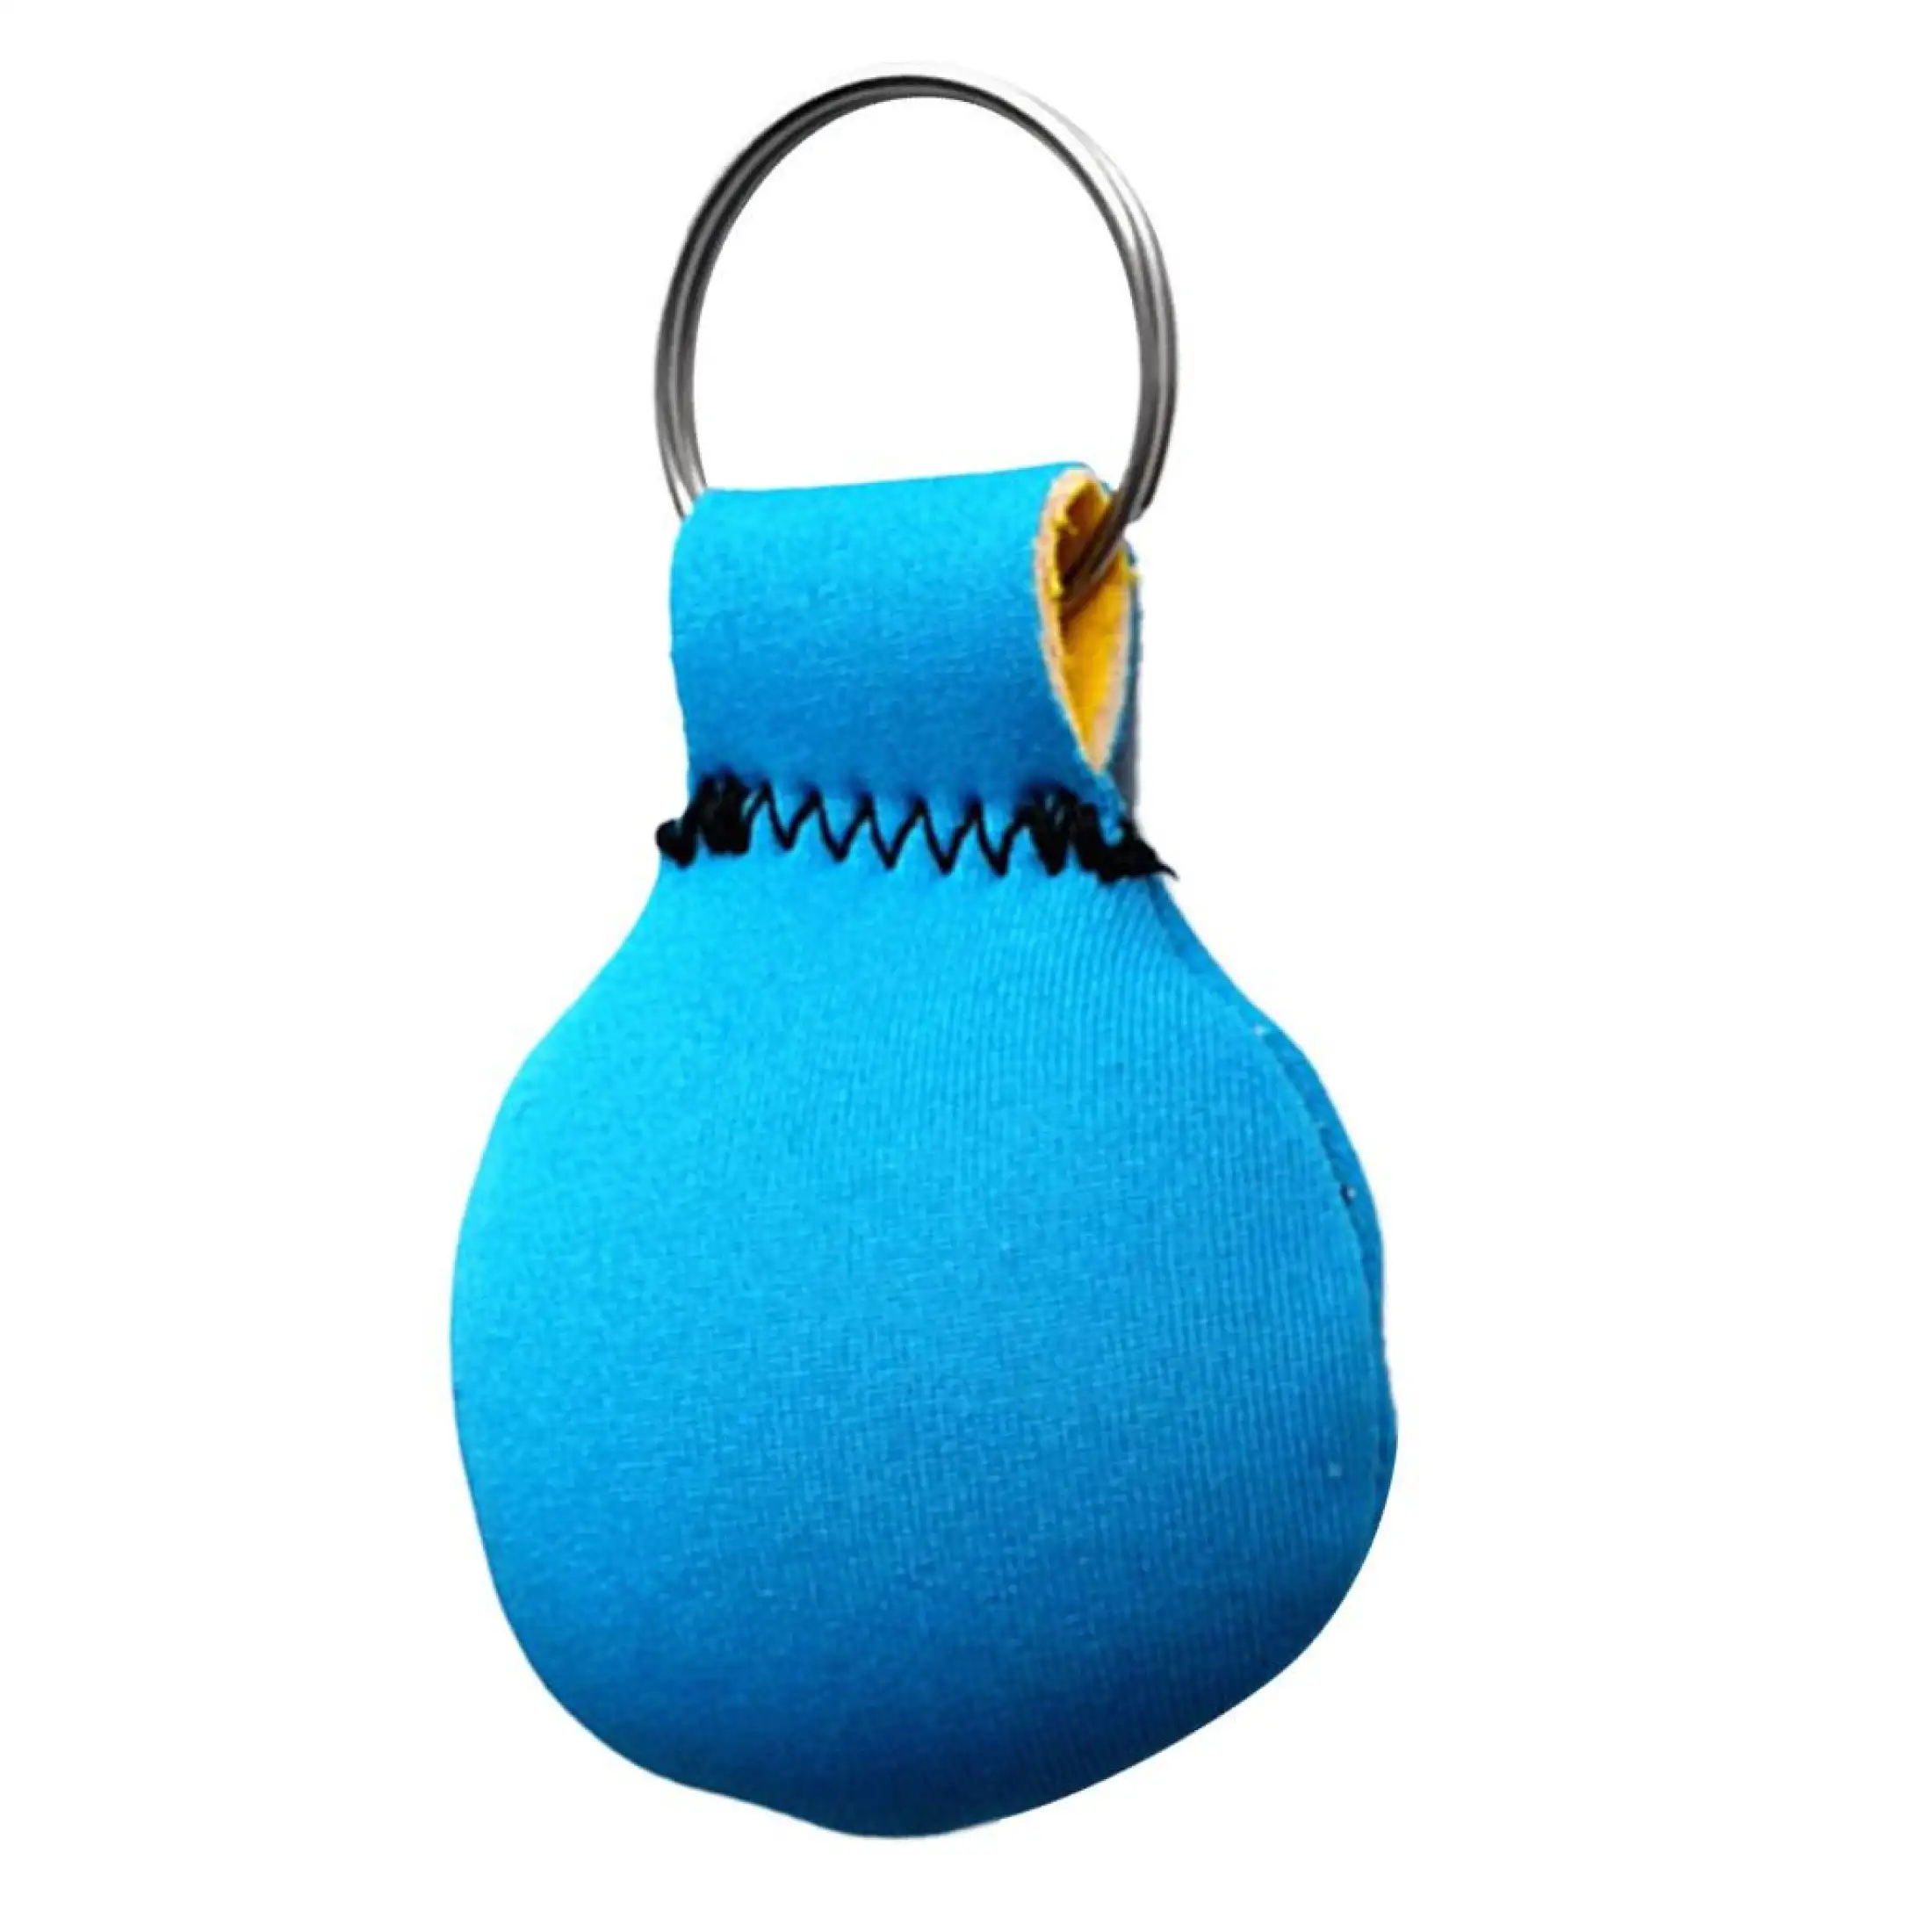 Round Neoprene Ball Keyring Key Holder for Multi Outdoor Sports Beach Travel Choice of Color Floating Keychain Fishing Boat Buoy Key Float